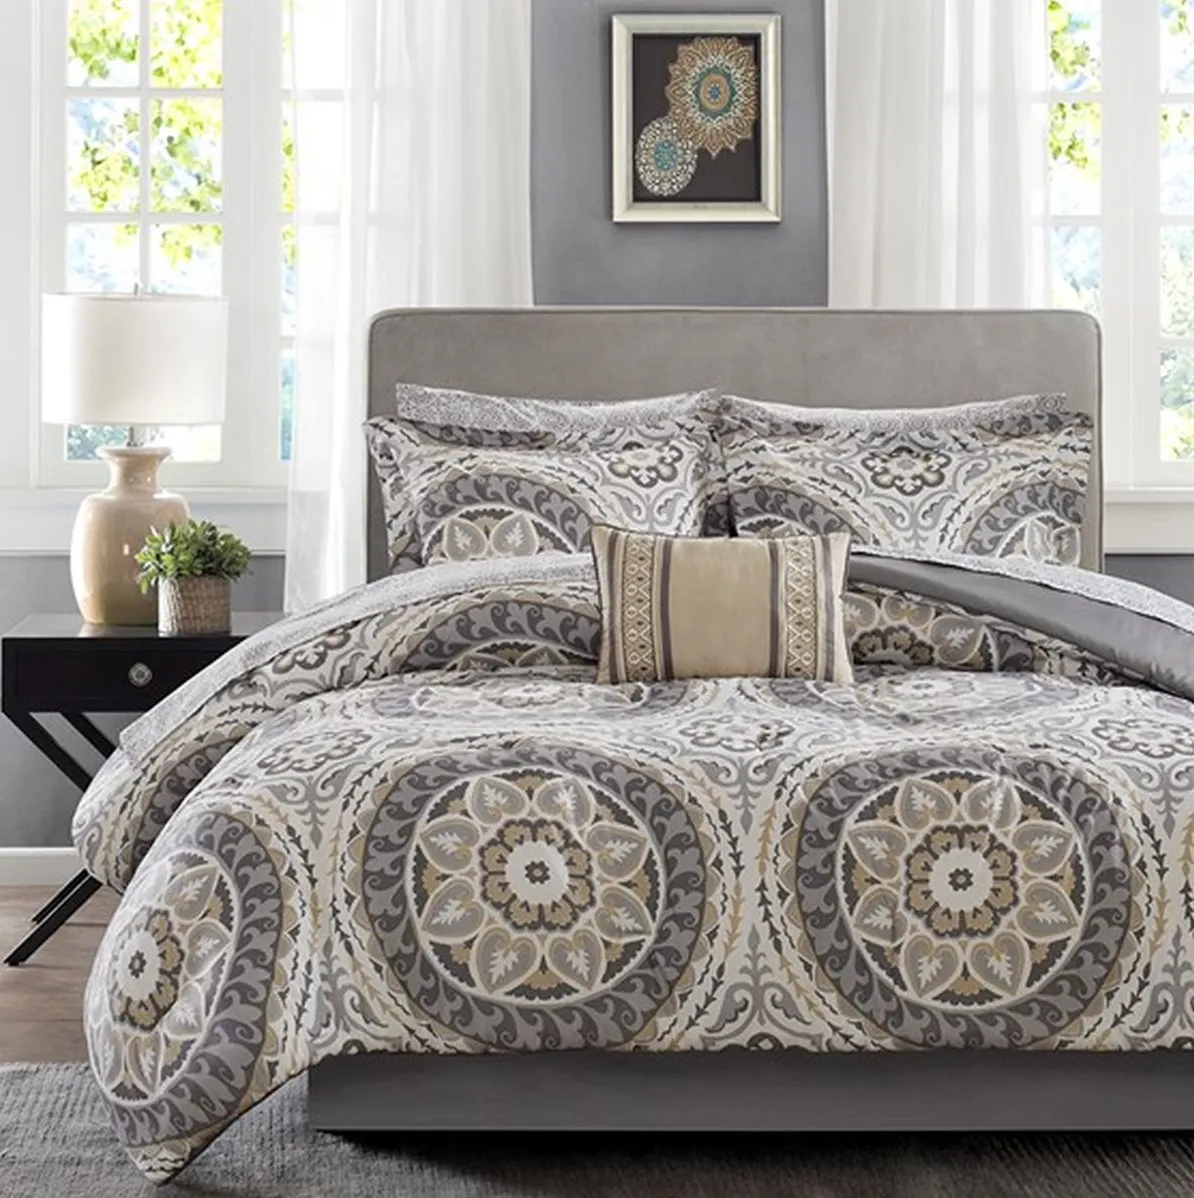 Olliix by Madison Park Essentials Taupe Queen Serenity Complete Comforter and Cotton Sheet Set